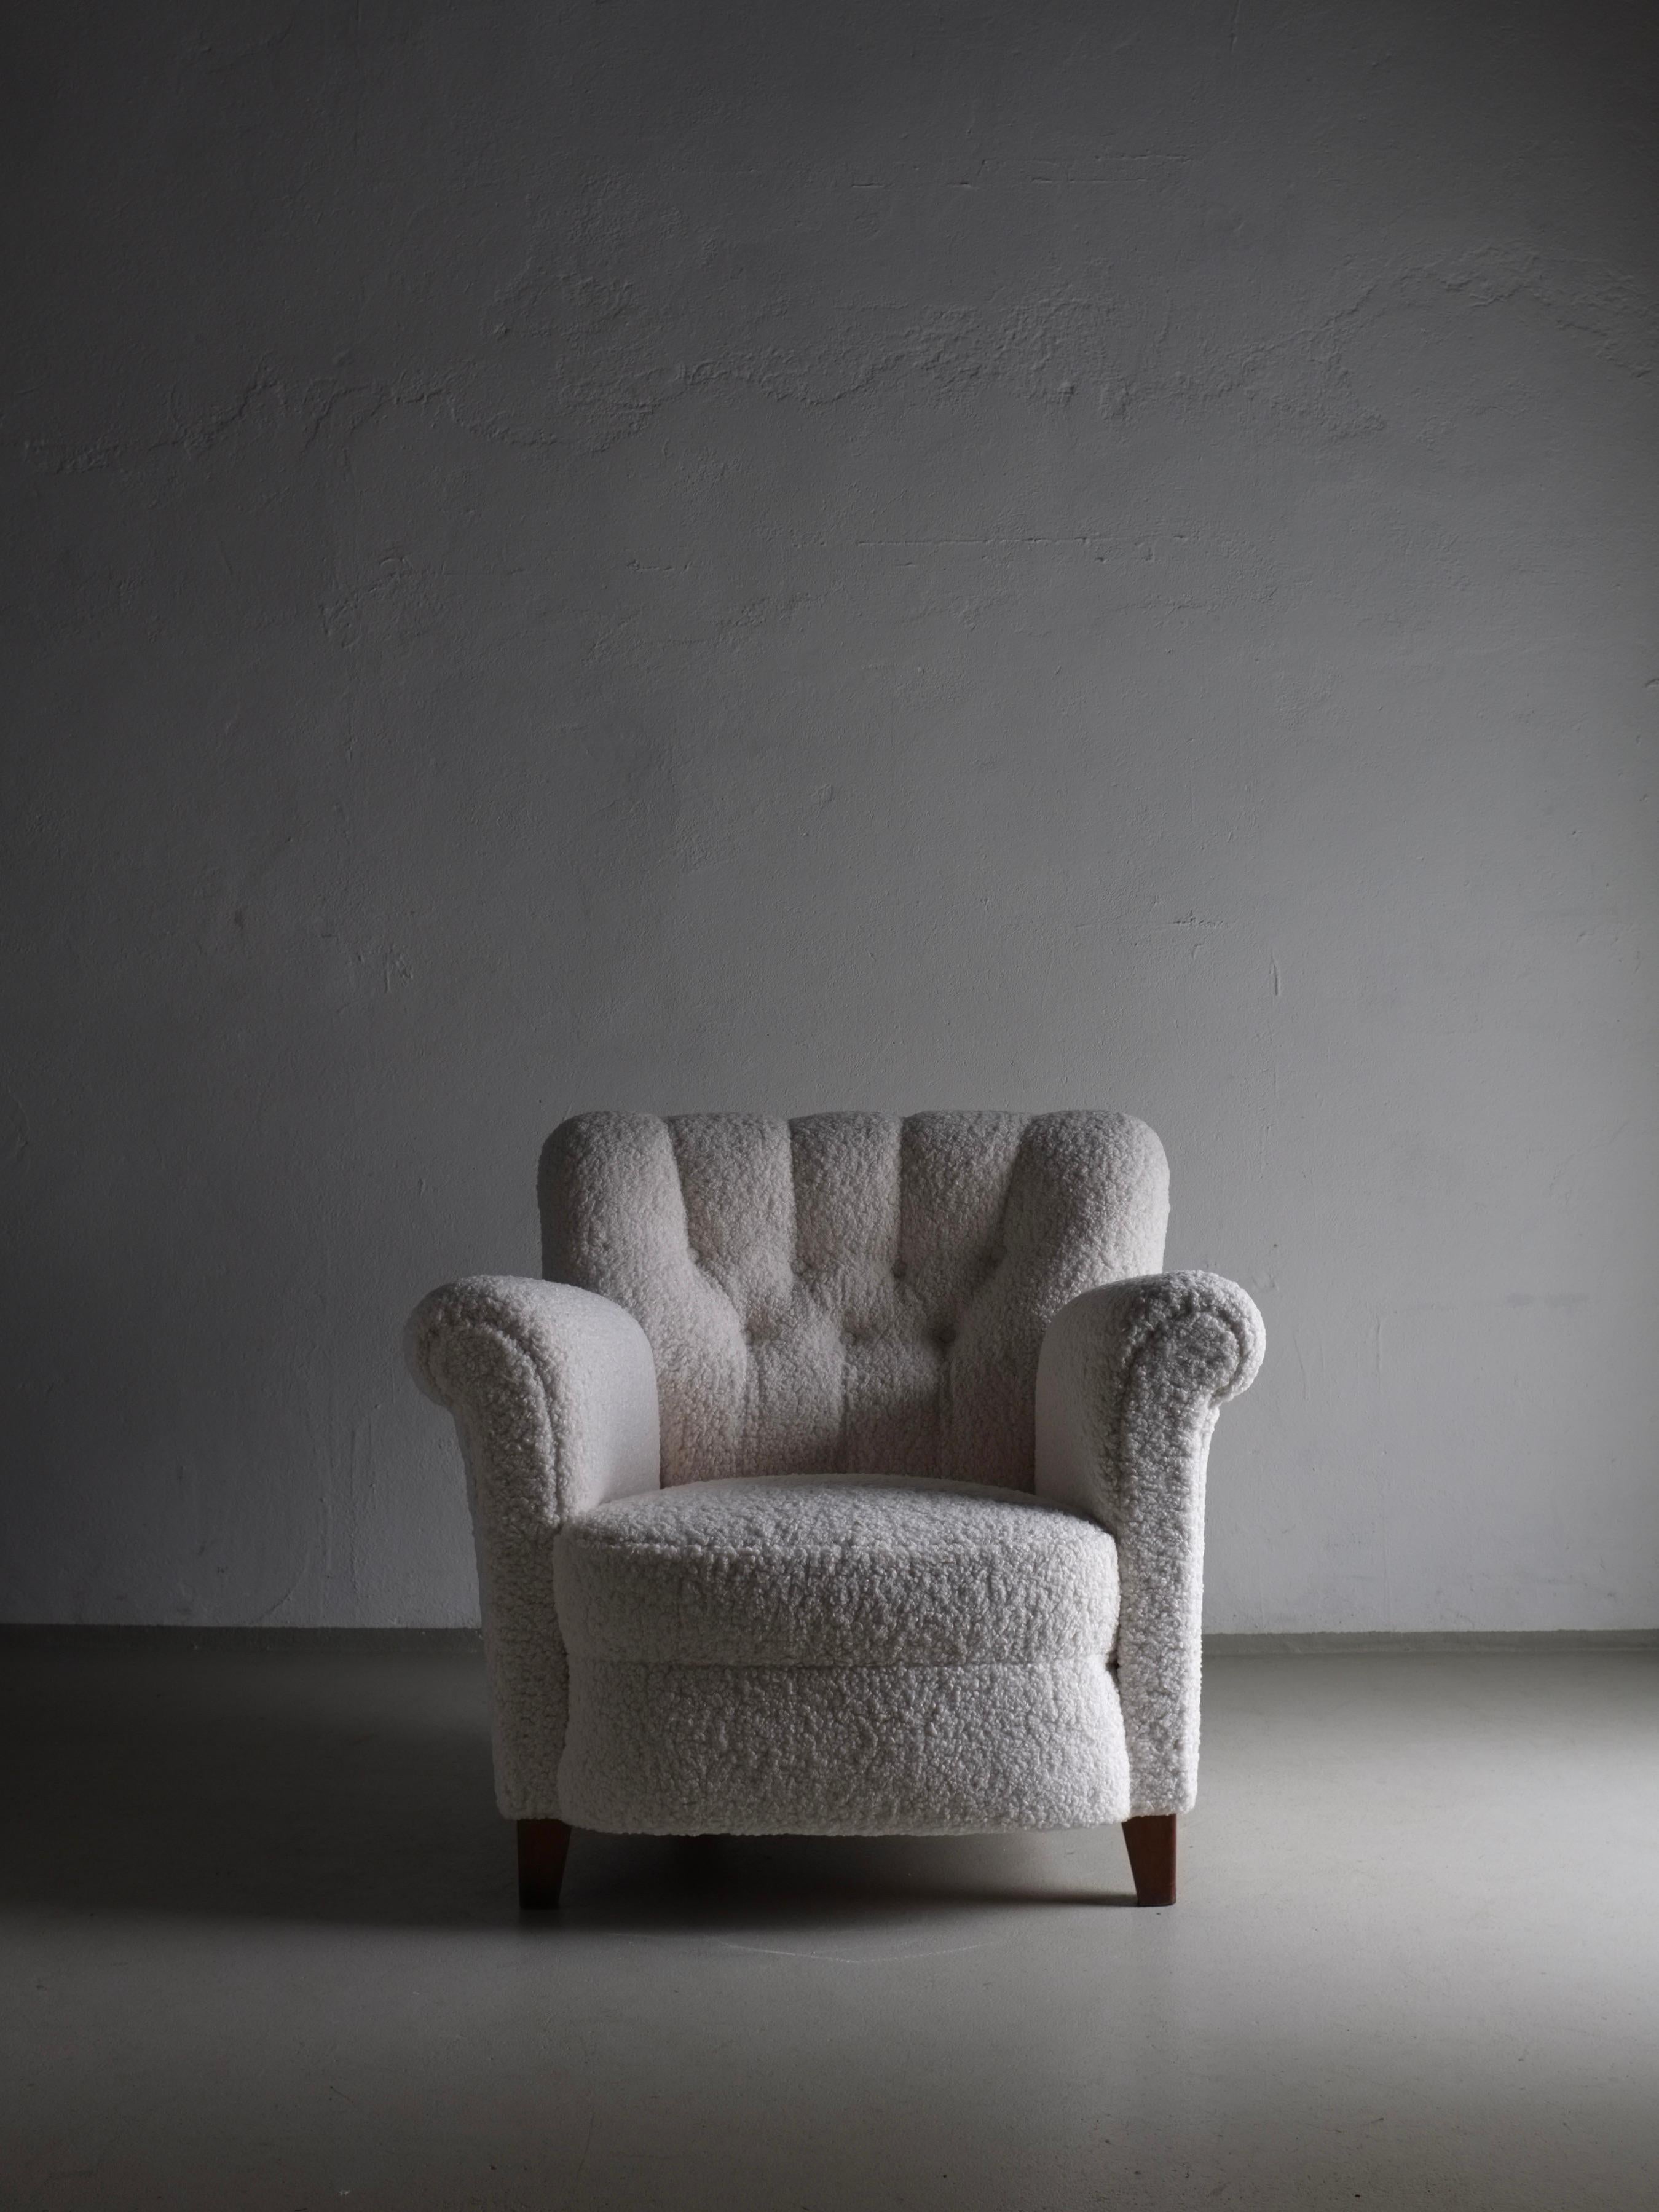 Vintage Teddy lounge chair from the 1940s upholstered with ivory white faux sheepskin fabric. It's a really heavy item. I have a matching fabric ottoman - it’s shown in the pictures.

Additional information:
Country of manufacture: Sweden
Period: